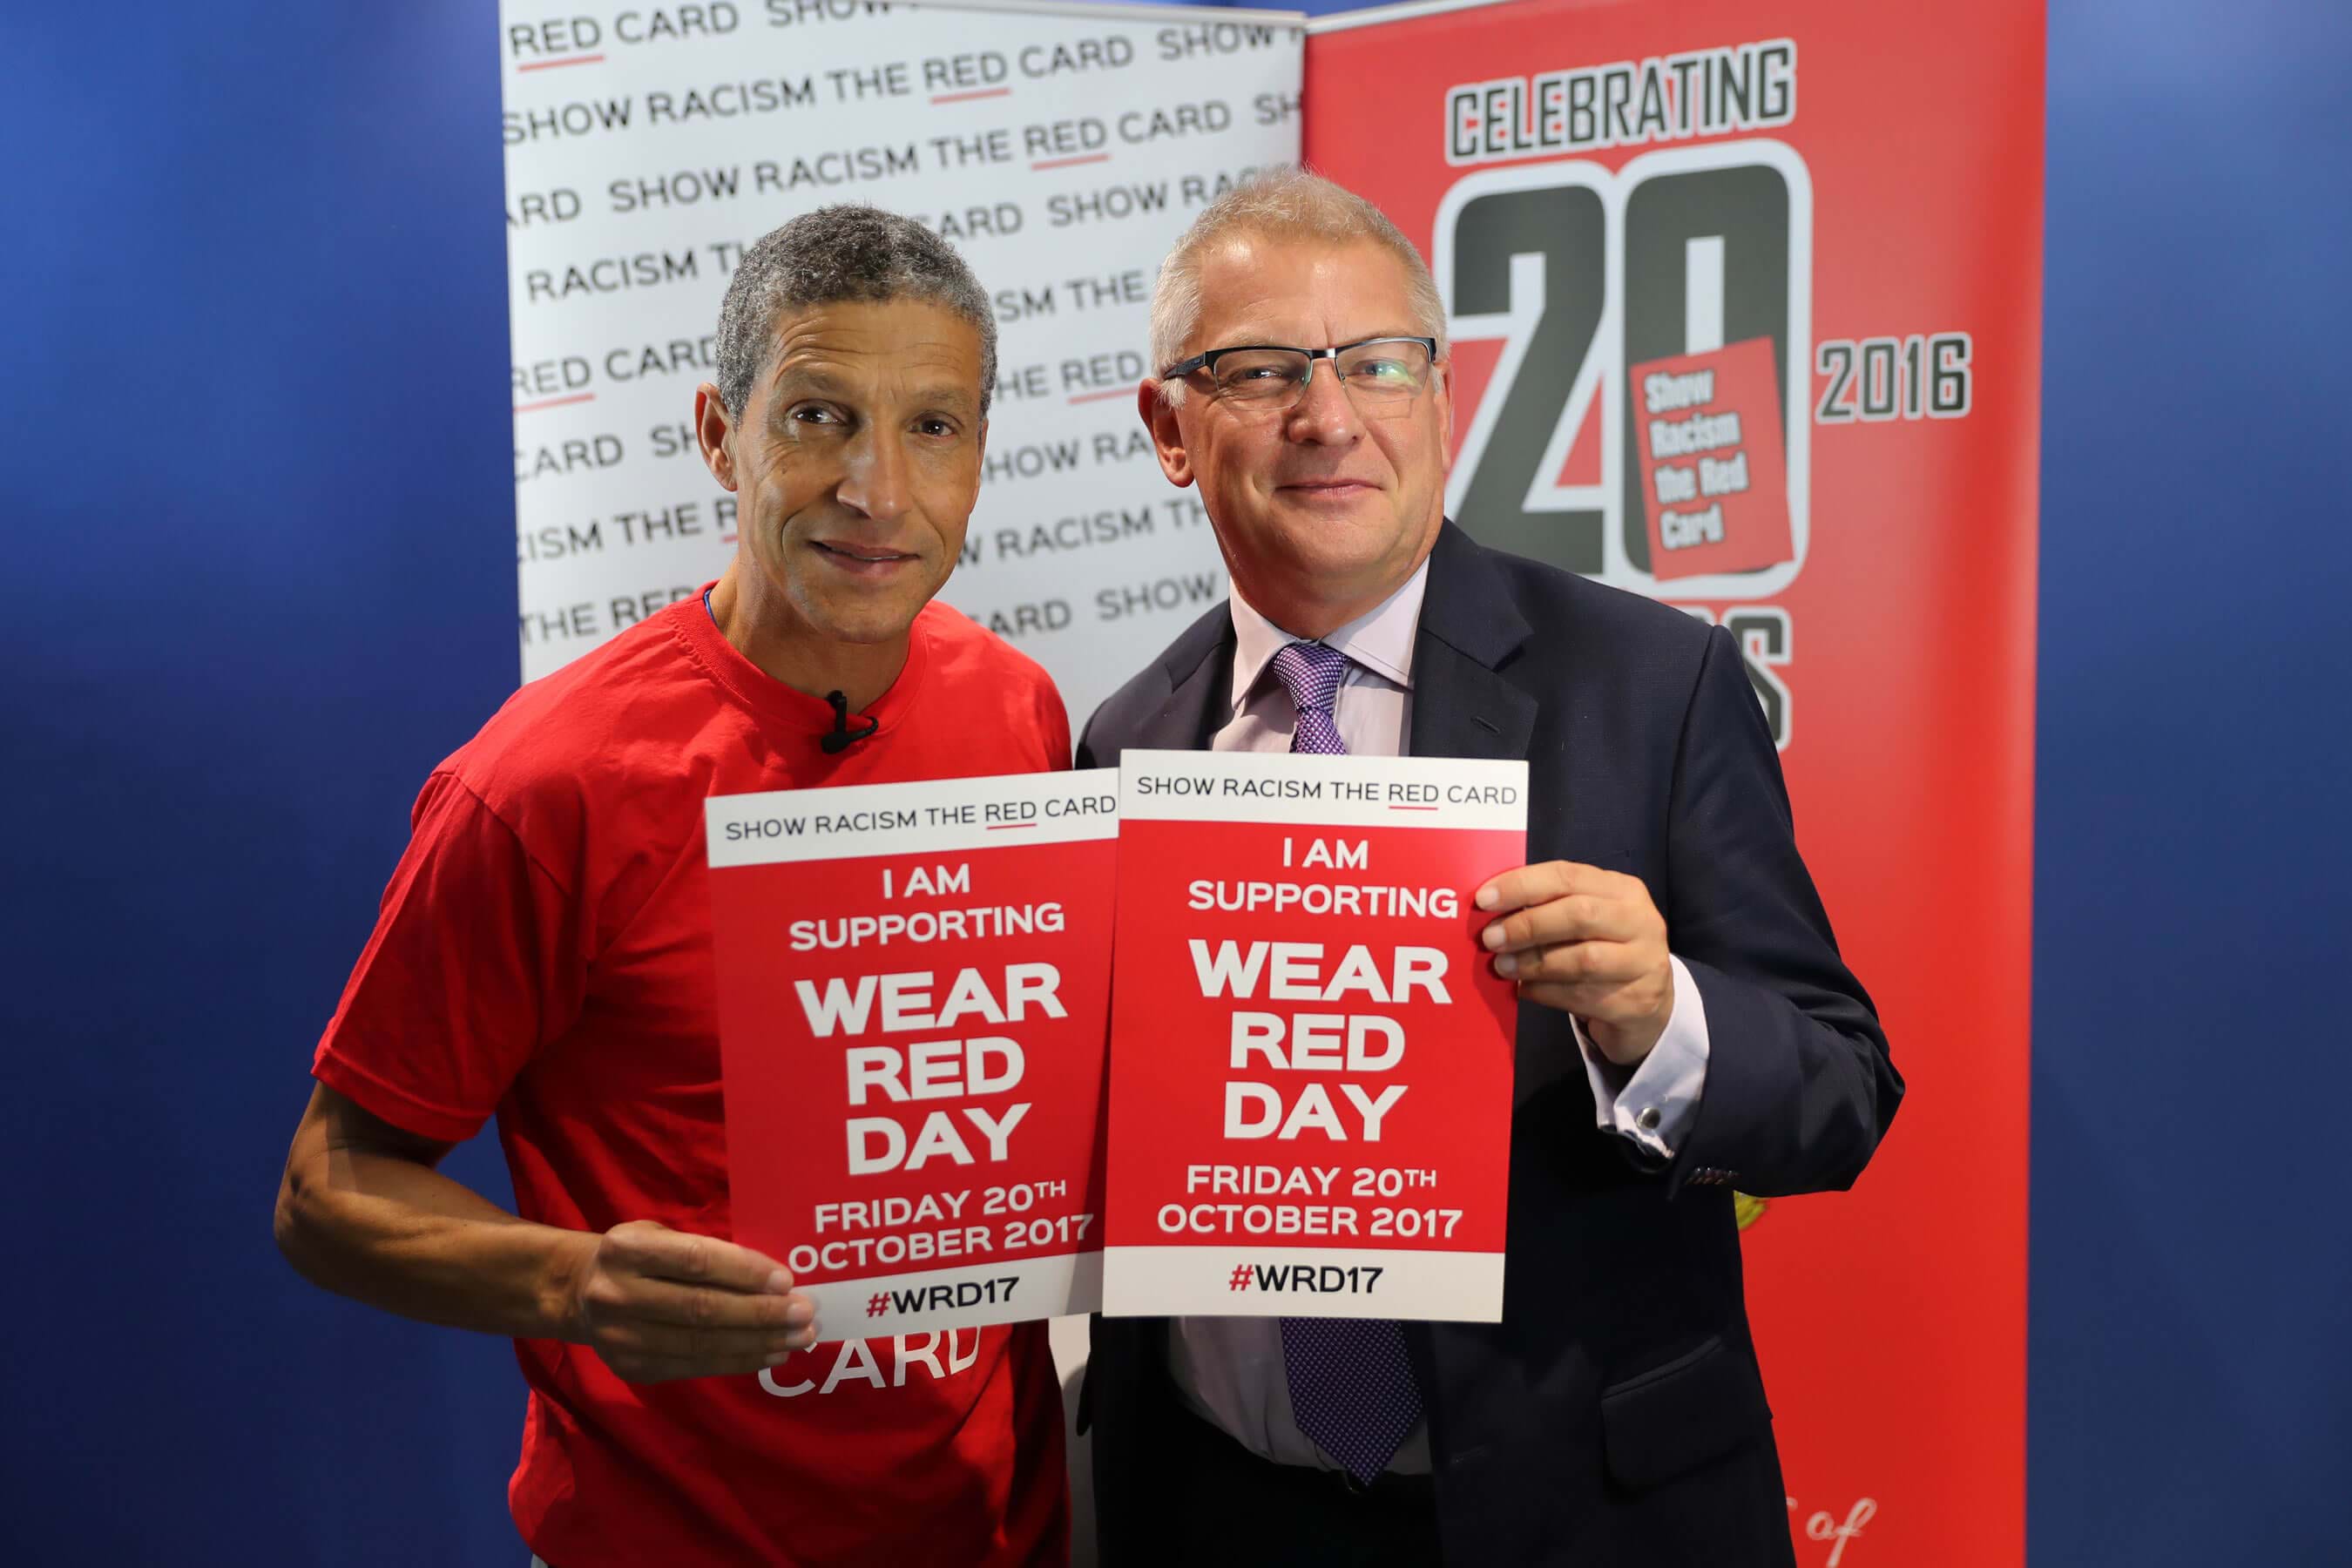 Irish former professional footballer and current manager of Brighton & Hove Albion, Chris Hughton, and Thompsons Solicitors’ chief executive, Stephen Cavalier, hold Show Racism the Red Card posters.